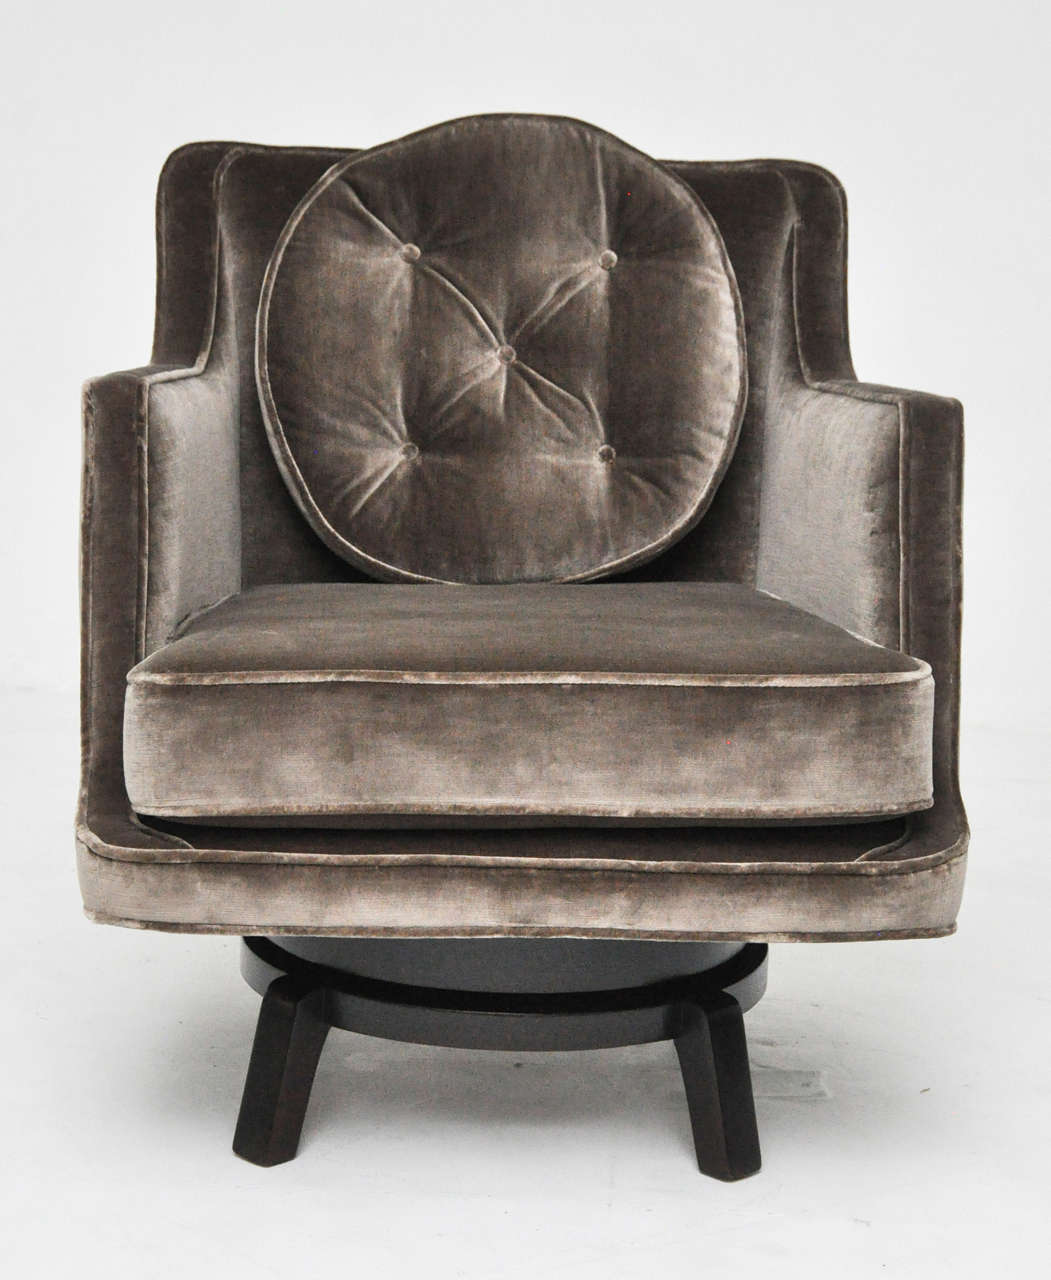 Swivel lounge chair by Edward Wormley for Dunbar.  Fully restored.  Newly upholstered.